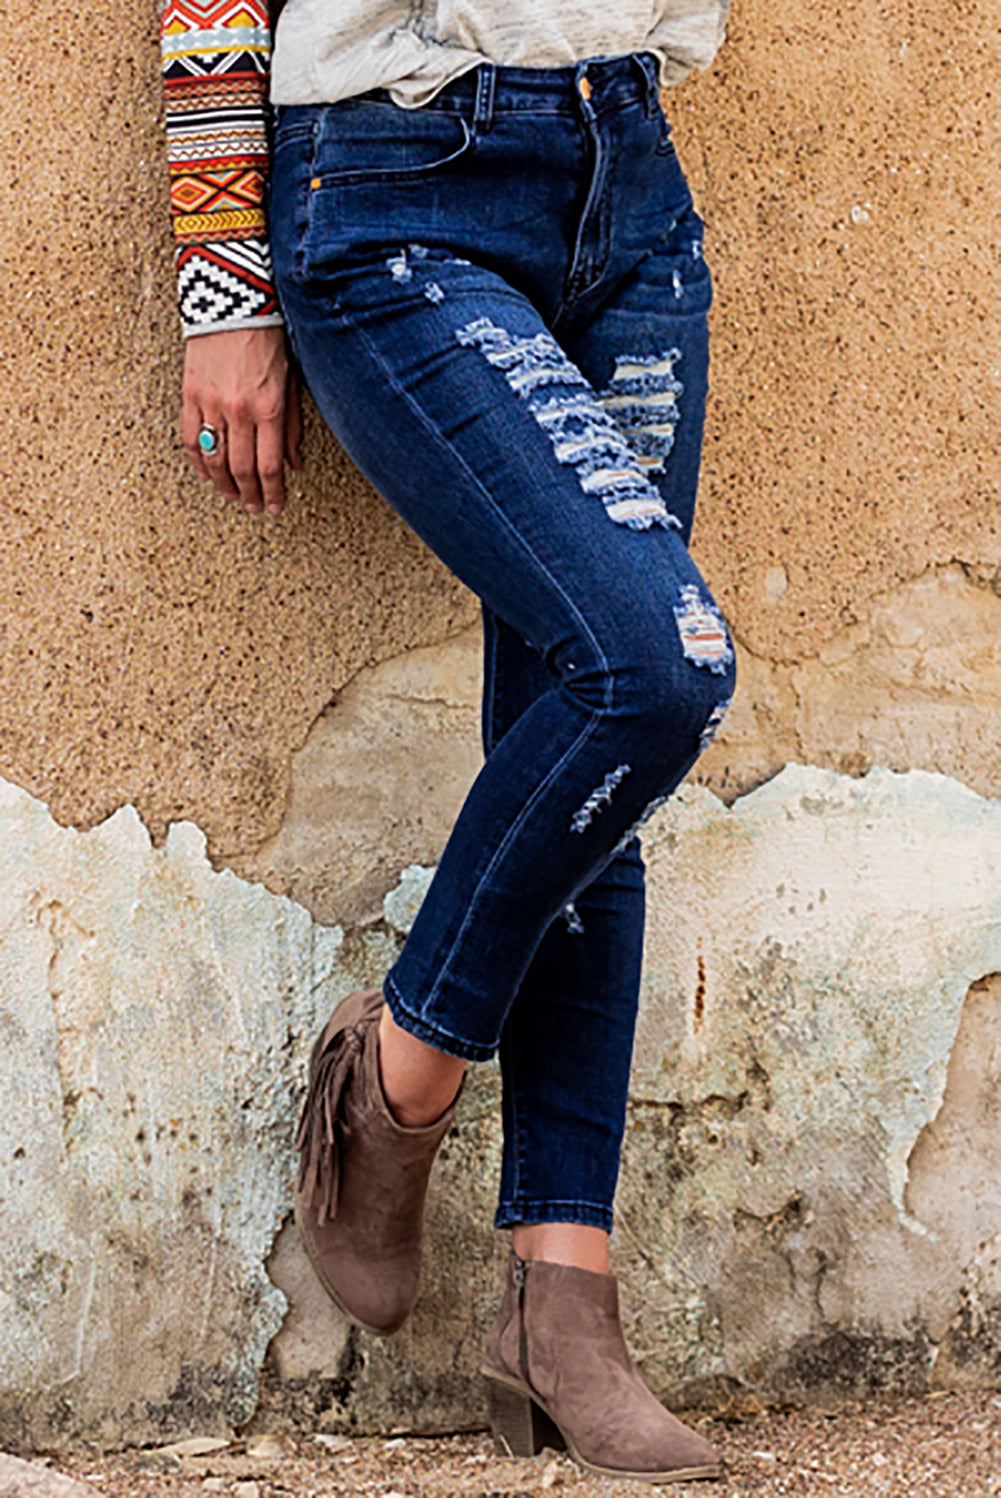 Blue Mid Rise Distressed Ripped Holes Skinny Jeans